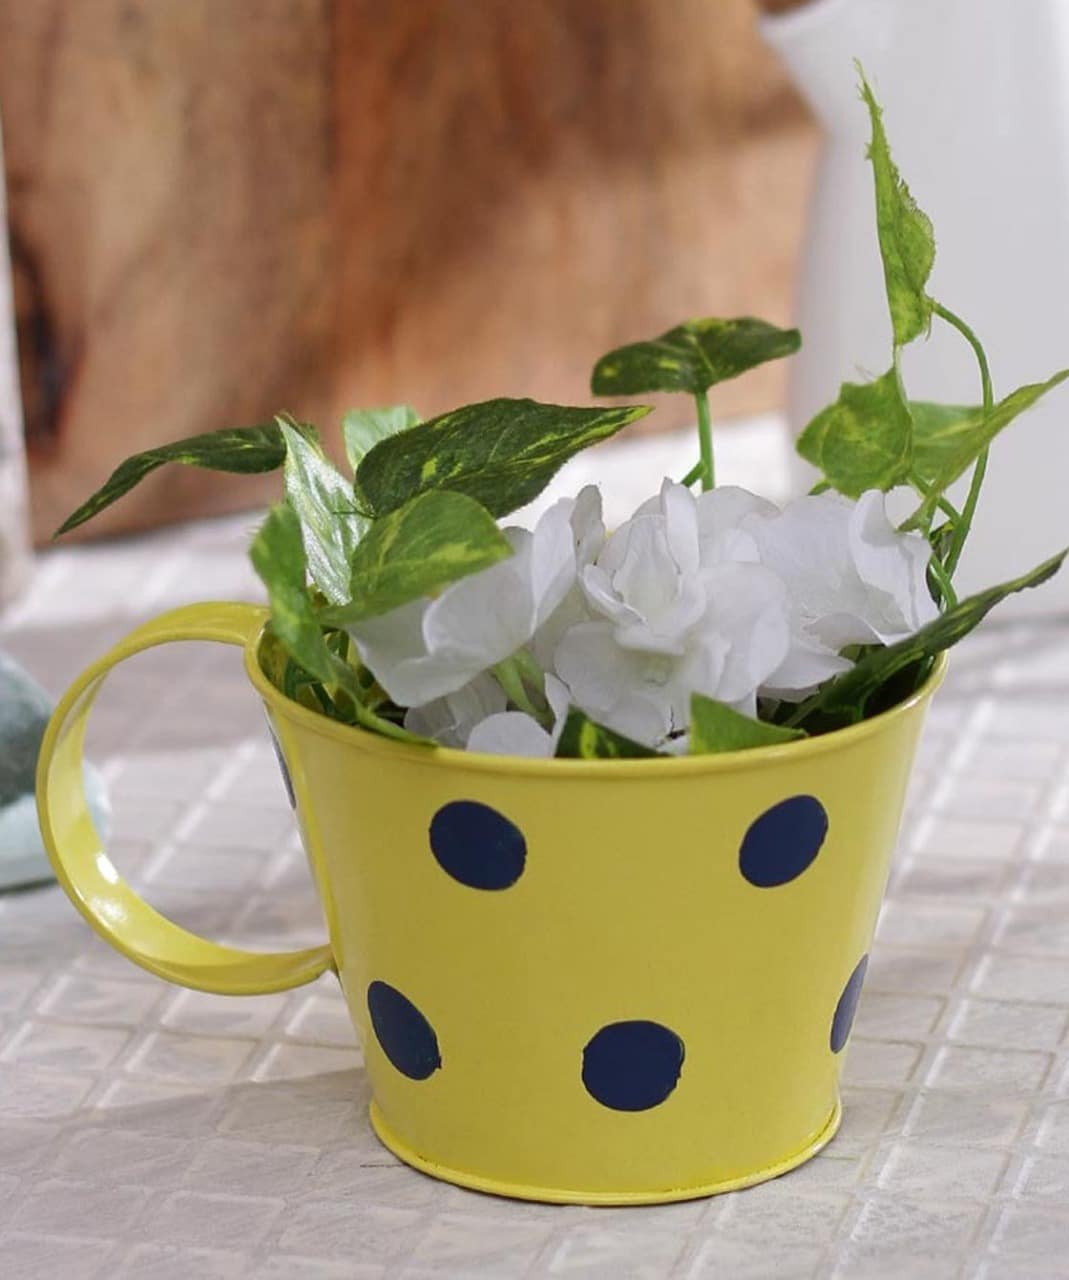 5 Inches Metal Polka Cup Shape Planter – Yellow